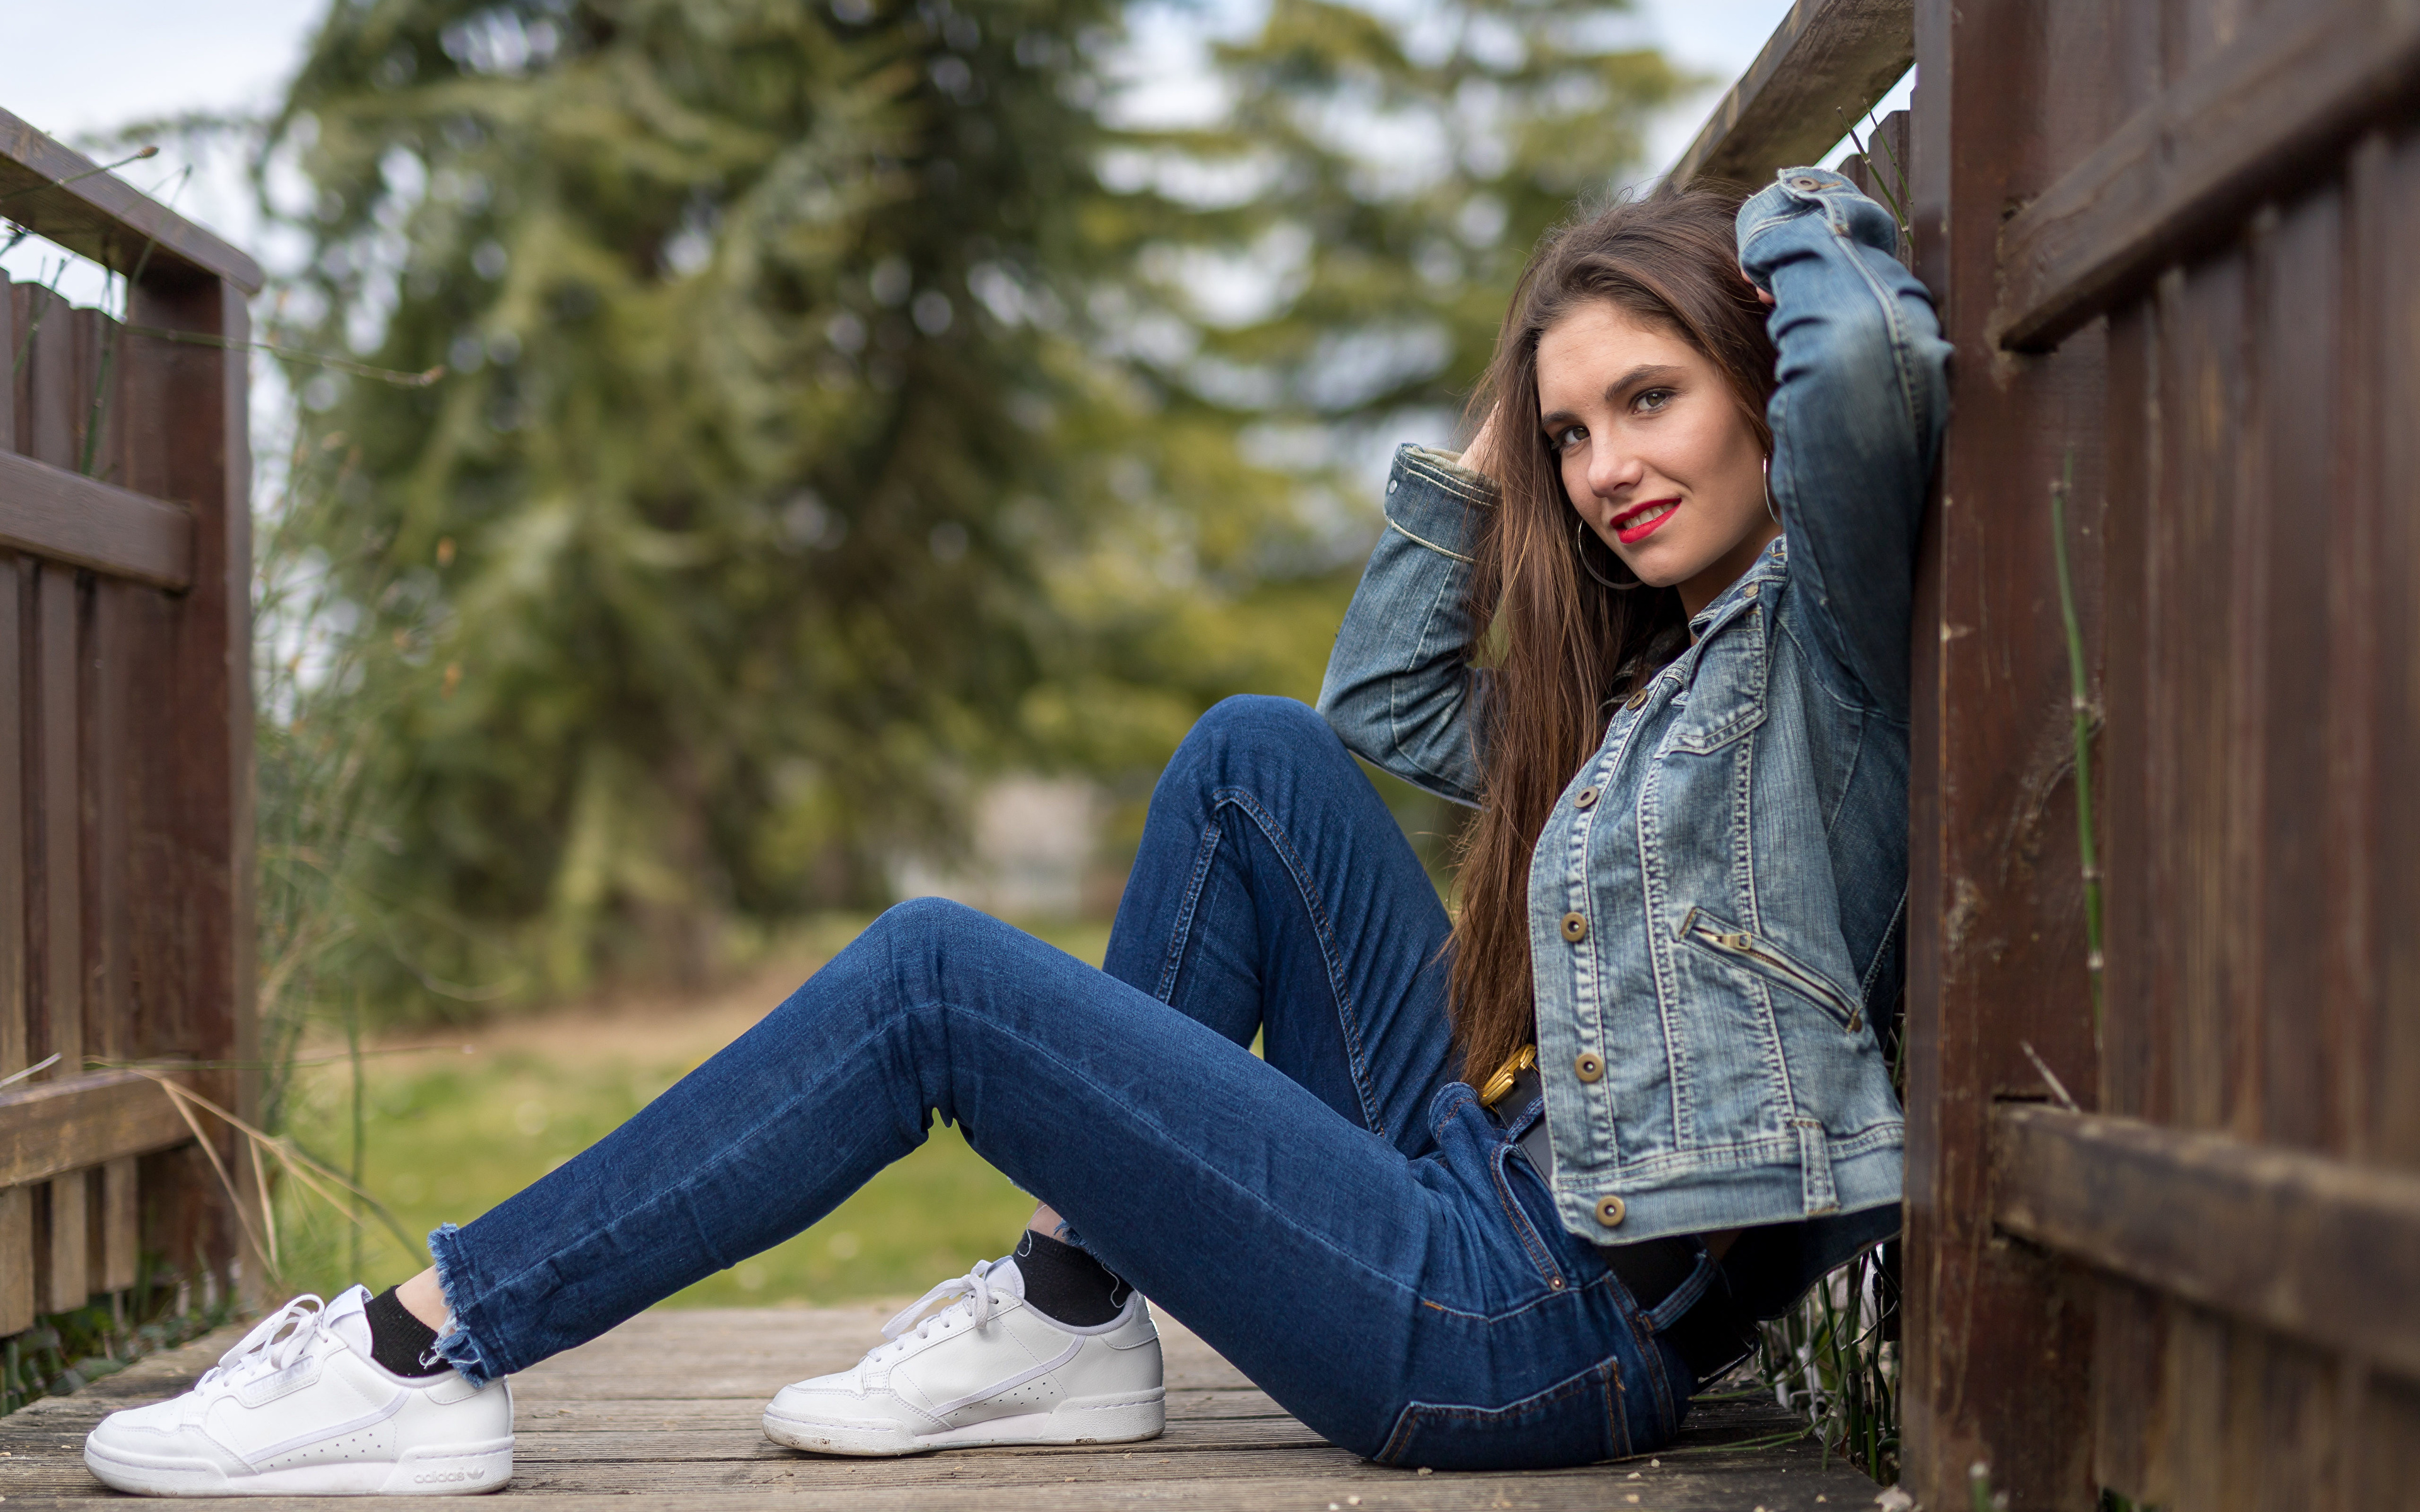 Cute Young Girl In A Dress And Denim Jacket Striking A Sassy Pose